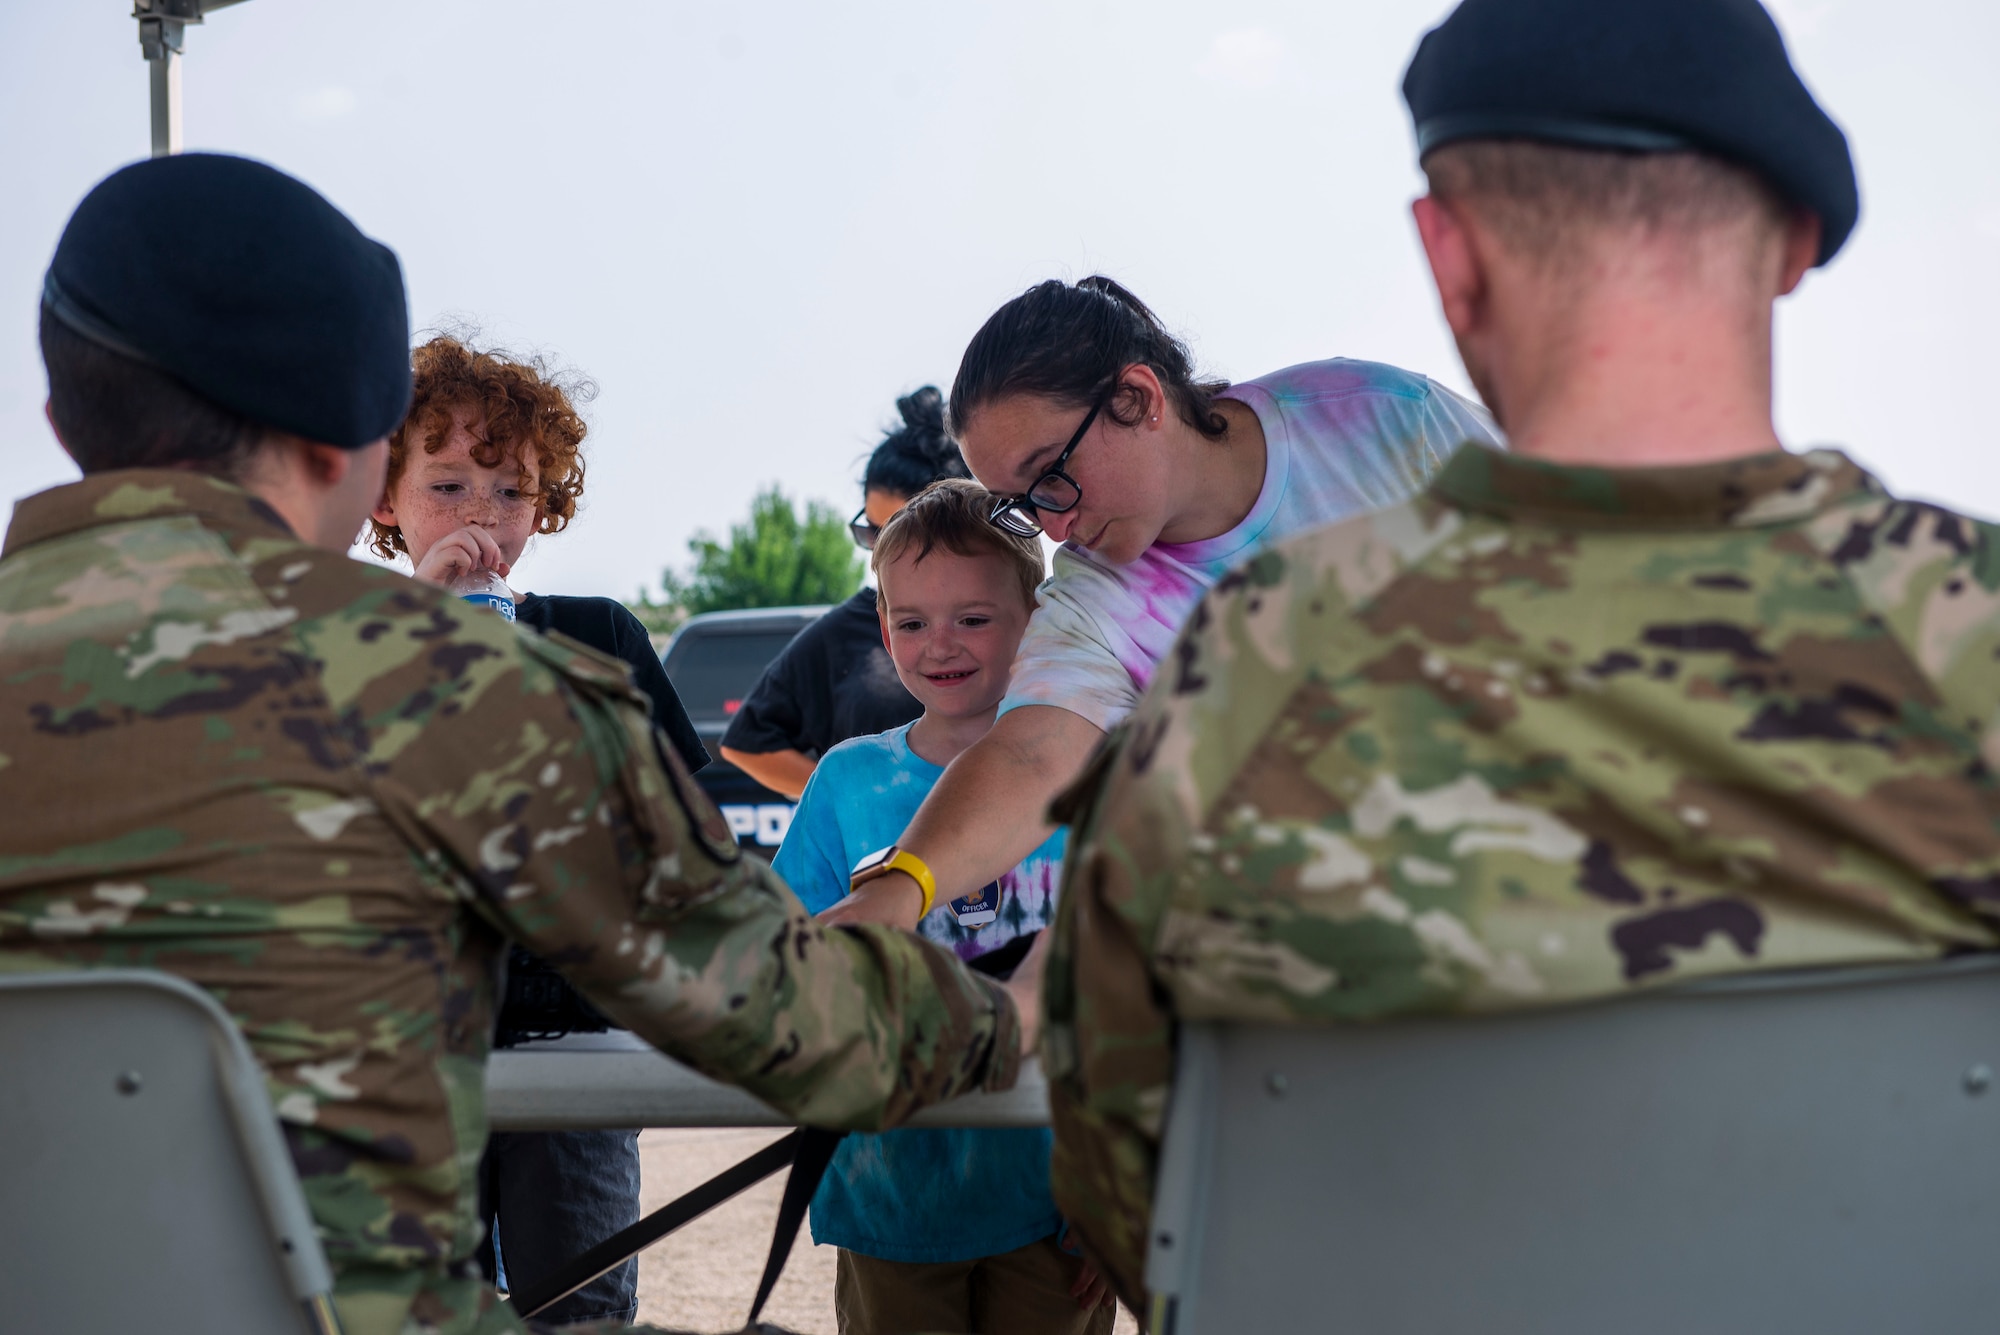 Two security forces airmen sit at a table with 2 children and their mother as the mother points to something on the table that makes one of the children smile.